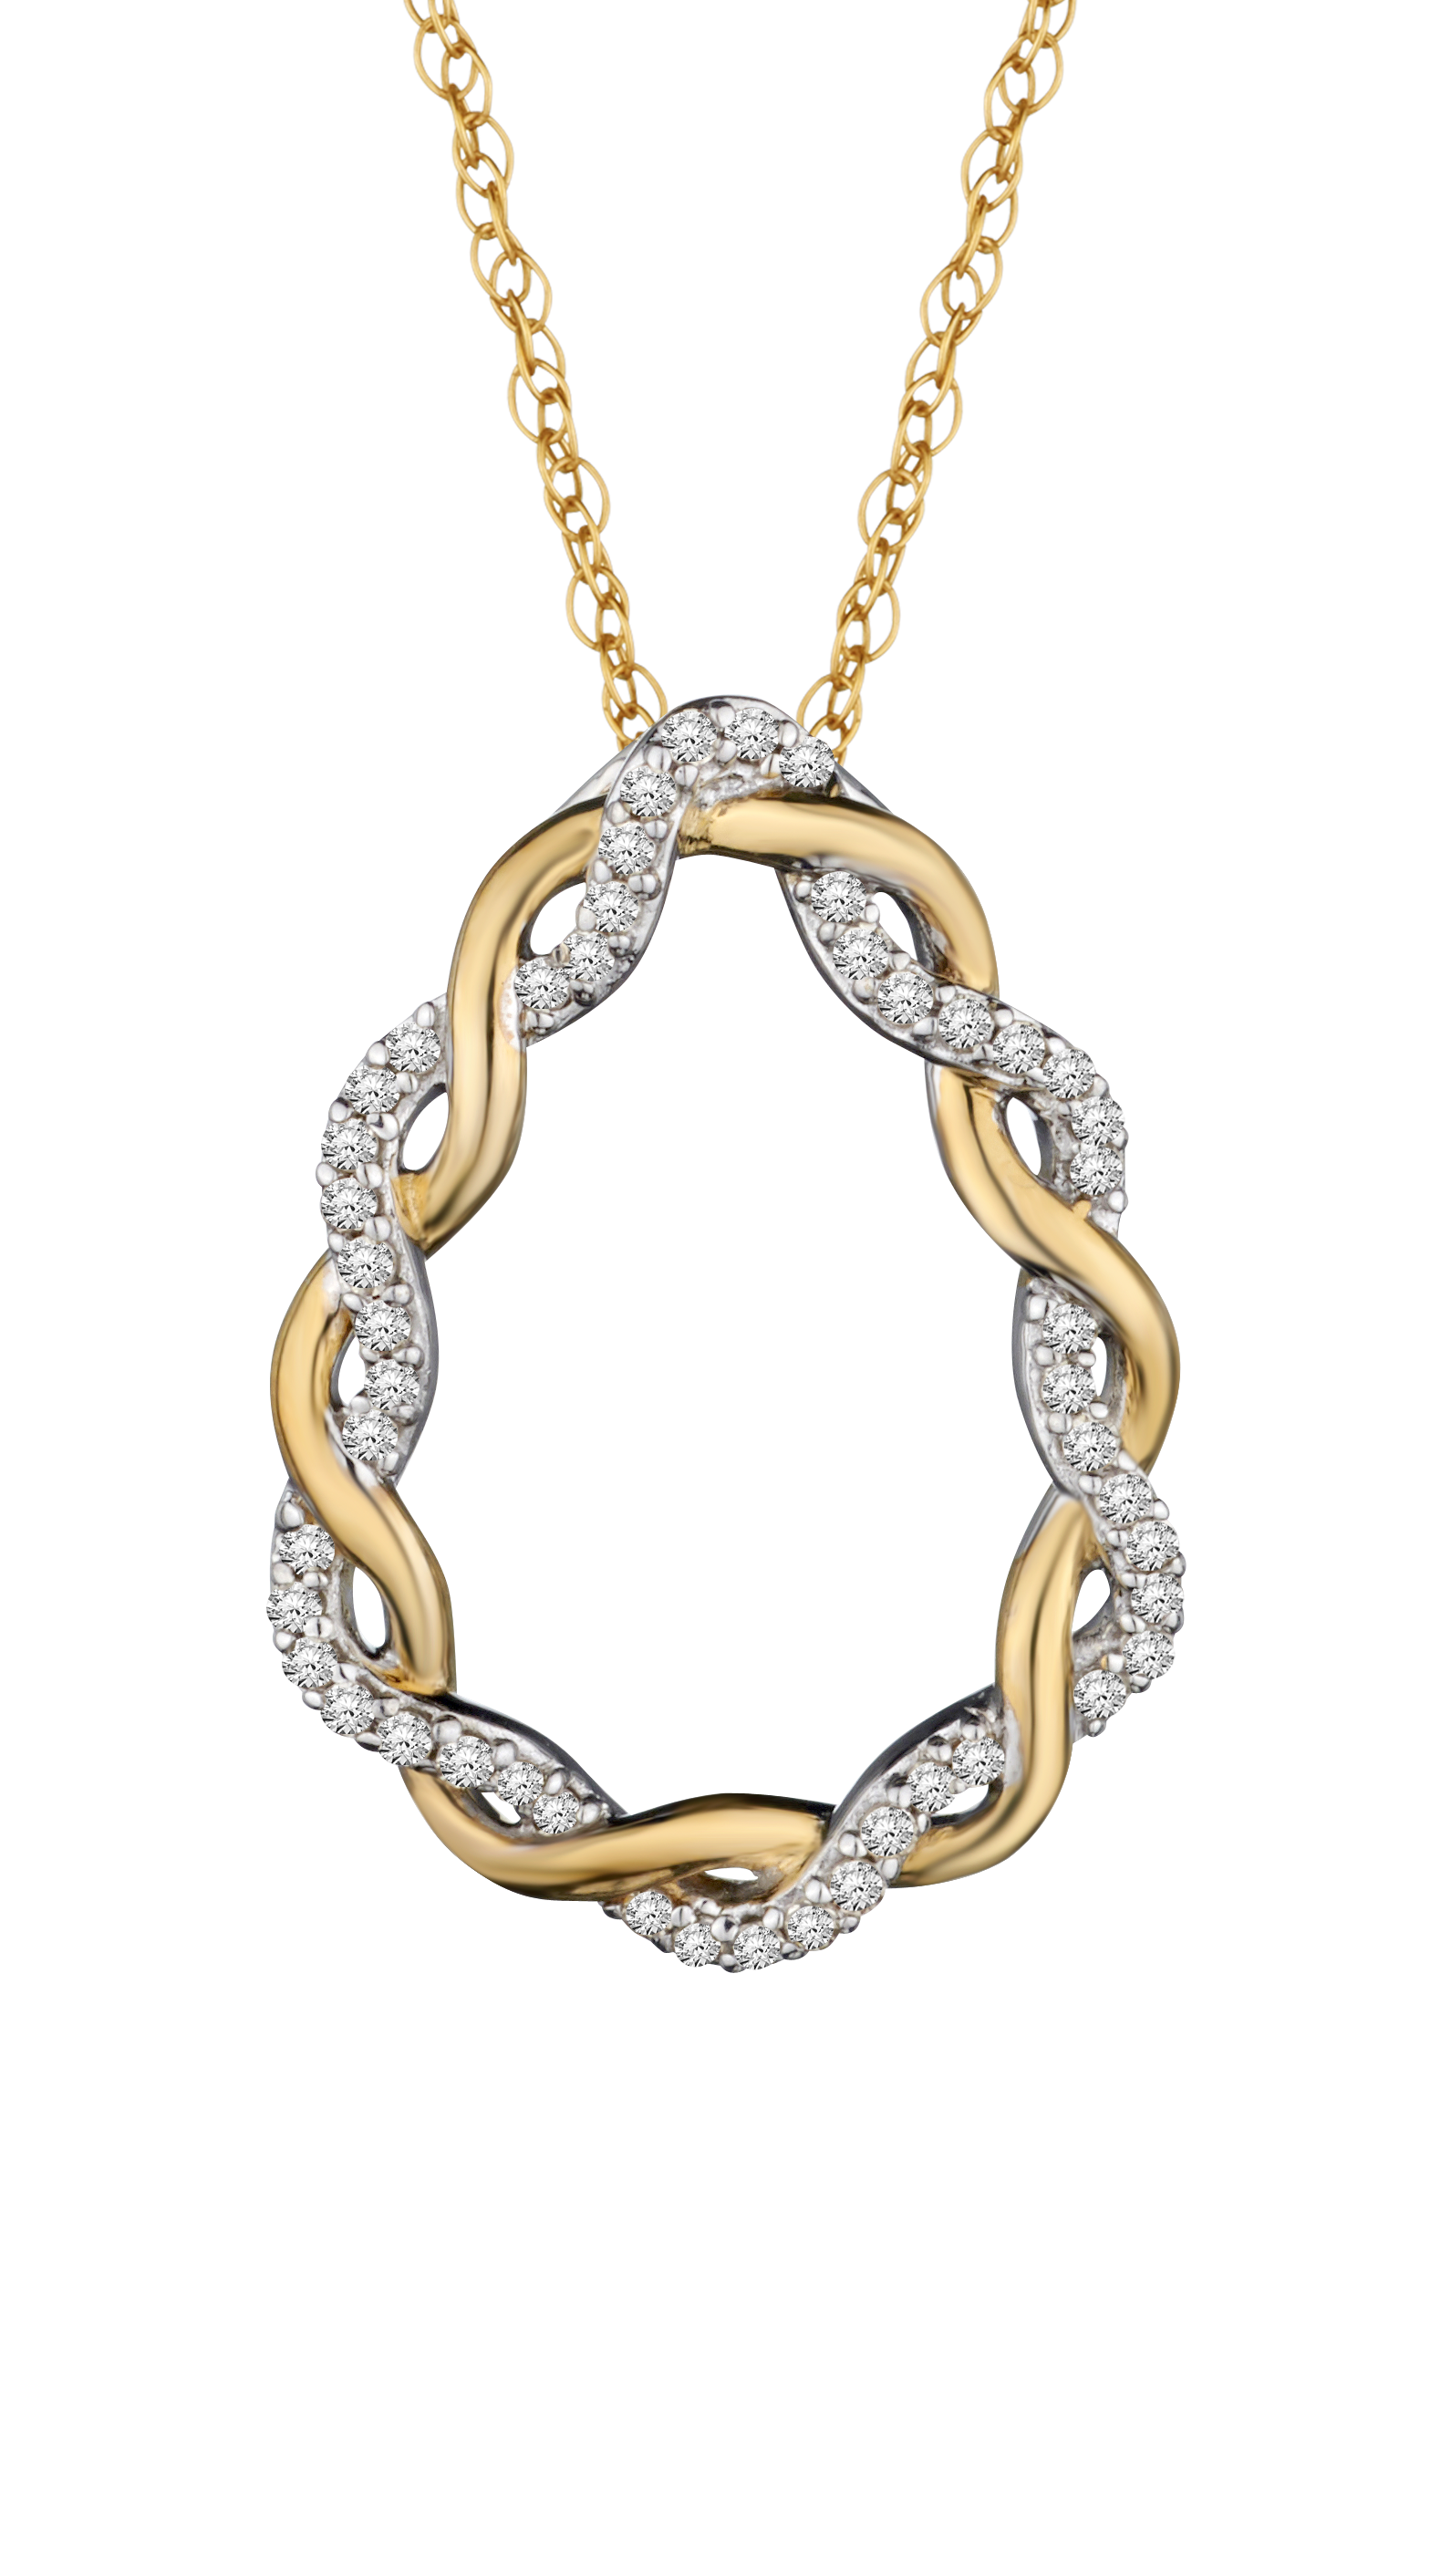 .17 Carat of Diamonds "Entwined" Pendant, 10kt Two Tone.....................NOW